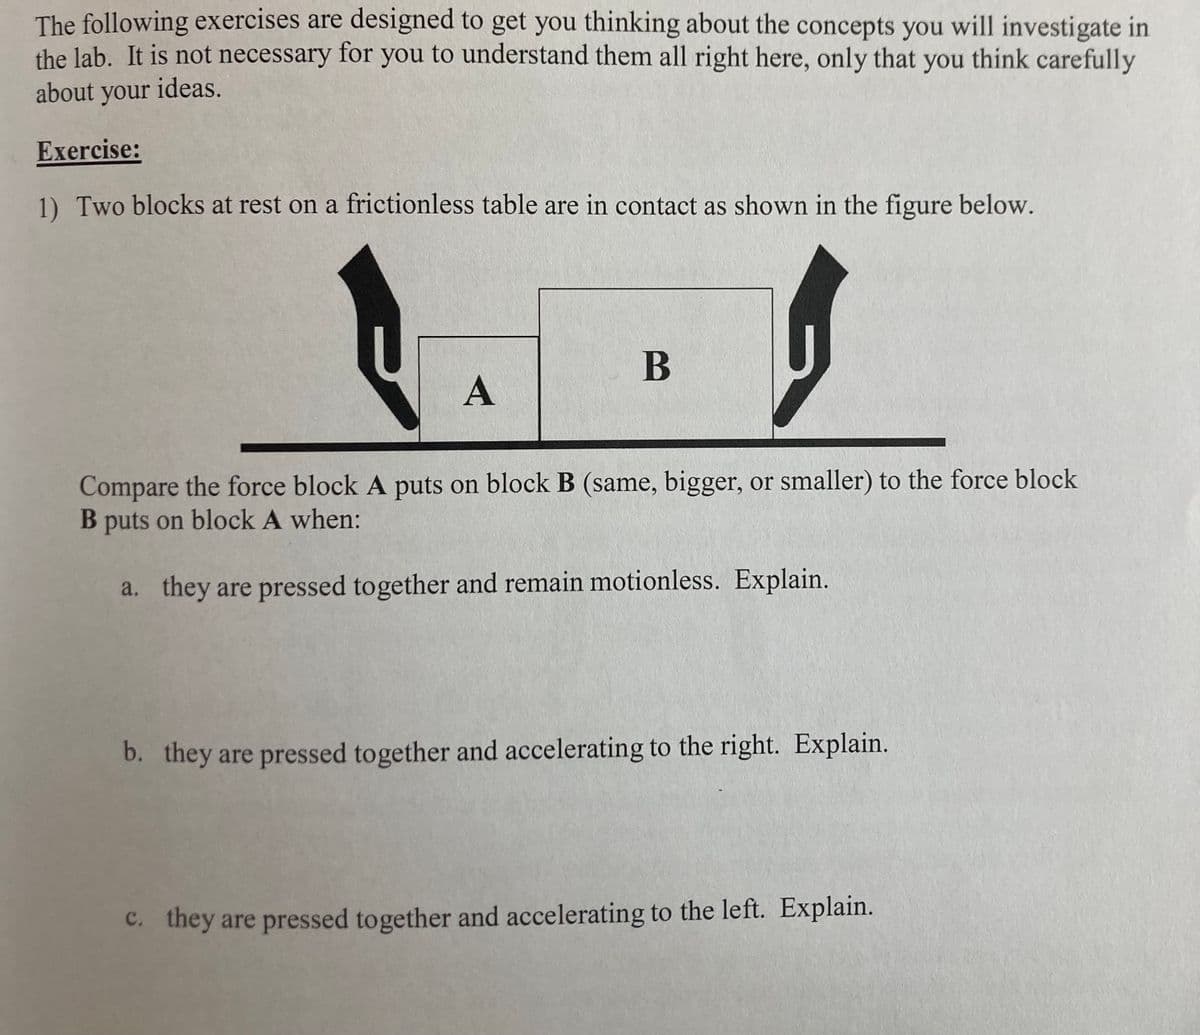 The following exercises are designed to get you thinking about the concepts you will investigate in
the lab. It is not necessary for you to understand them all right here, only that you think carefully
about your ideas.
Exercise:
1) Two blocks at rest on a frictionless table are in contact as shown in the figure below.
B
Compare the force block A puts on block B (same, bigger, or smaller) to the force block
B puts on block A when:
a. they are pressed together and remain motionless. Explain.
b. they are pressed together and accelerating to the right. Explain.
c. they are pressed together and accelerating to the left. Explain.
